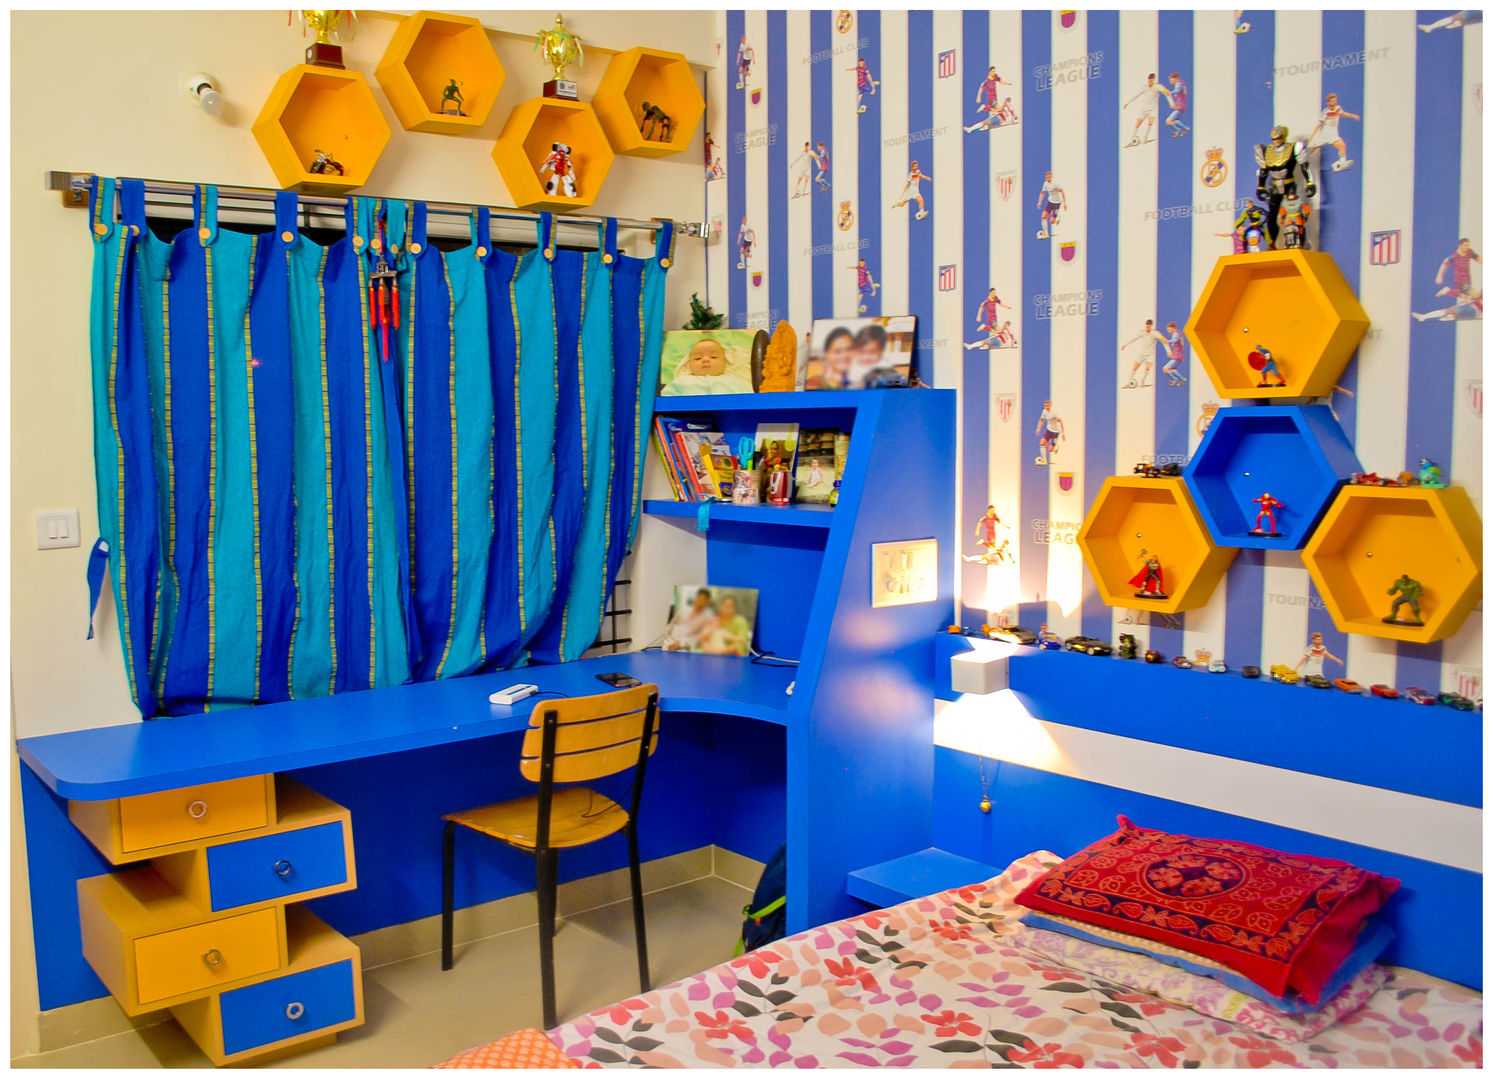 Kid's room study unit Space Collage Modern style bedroom